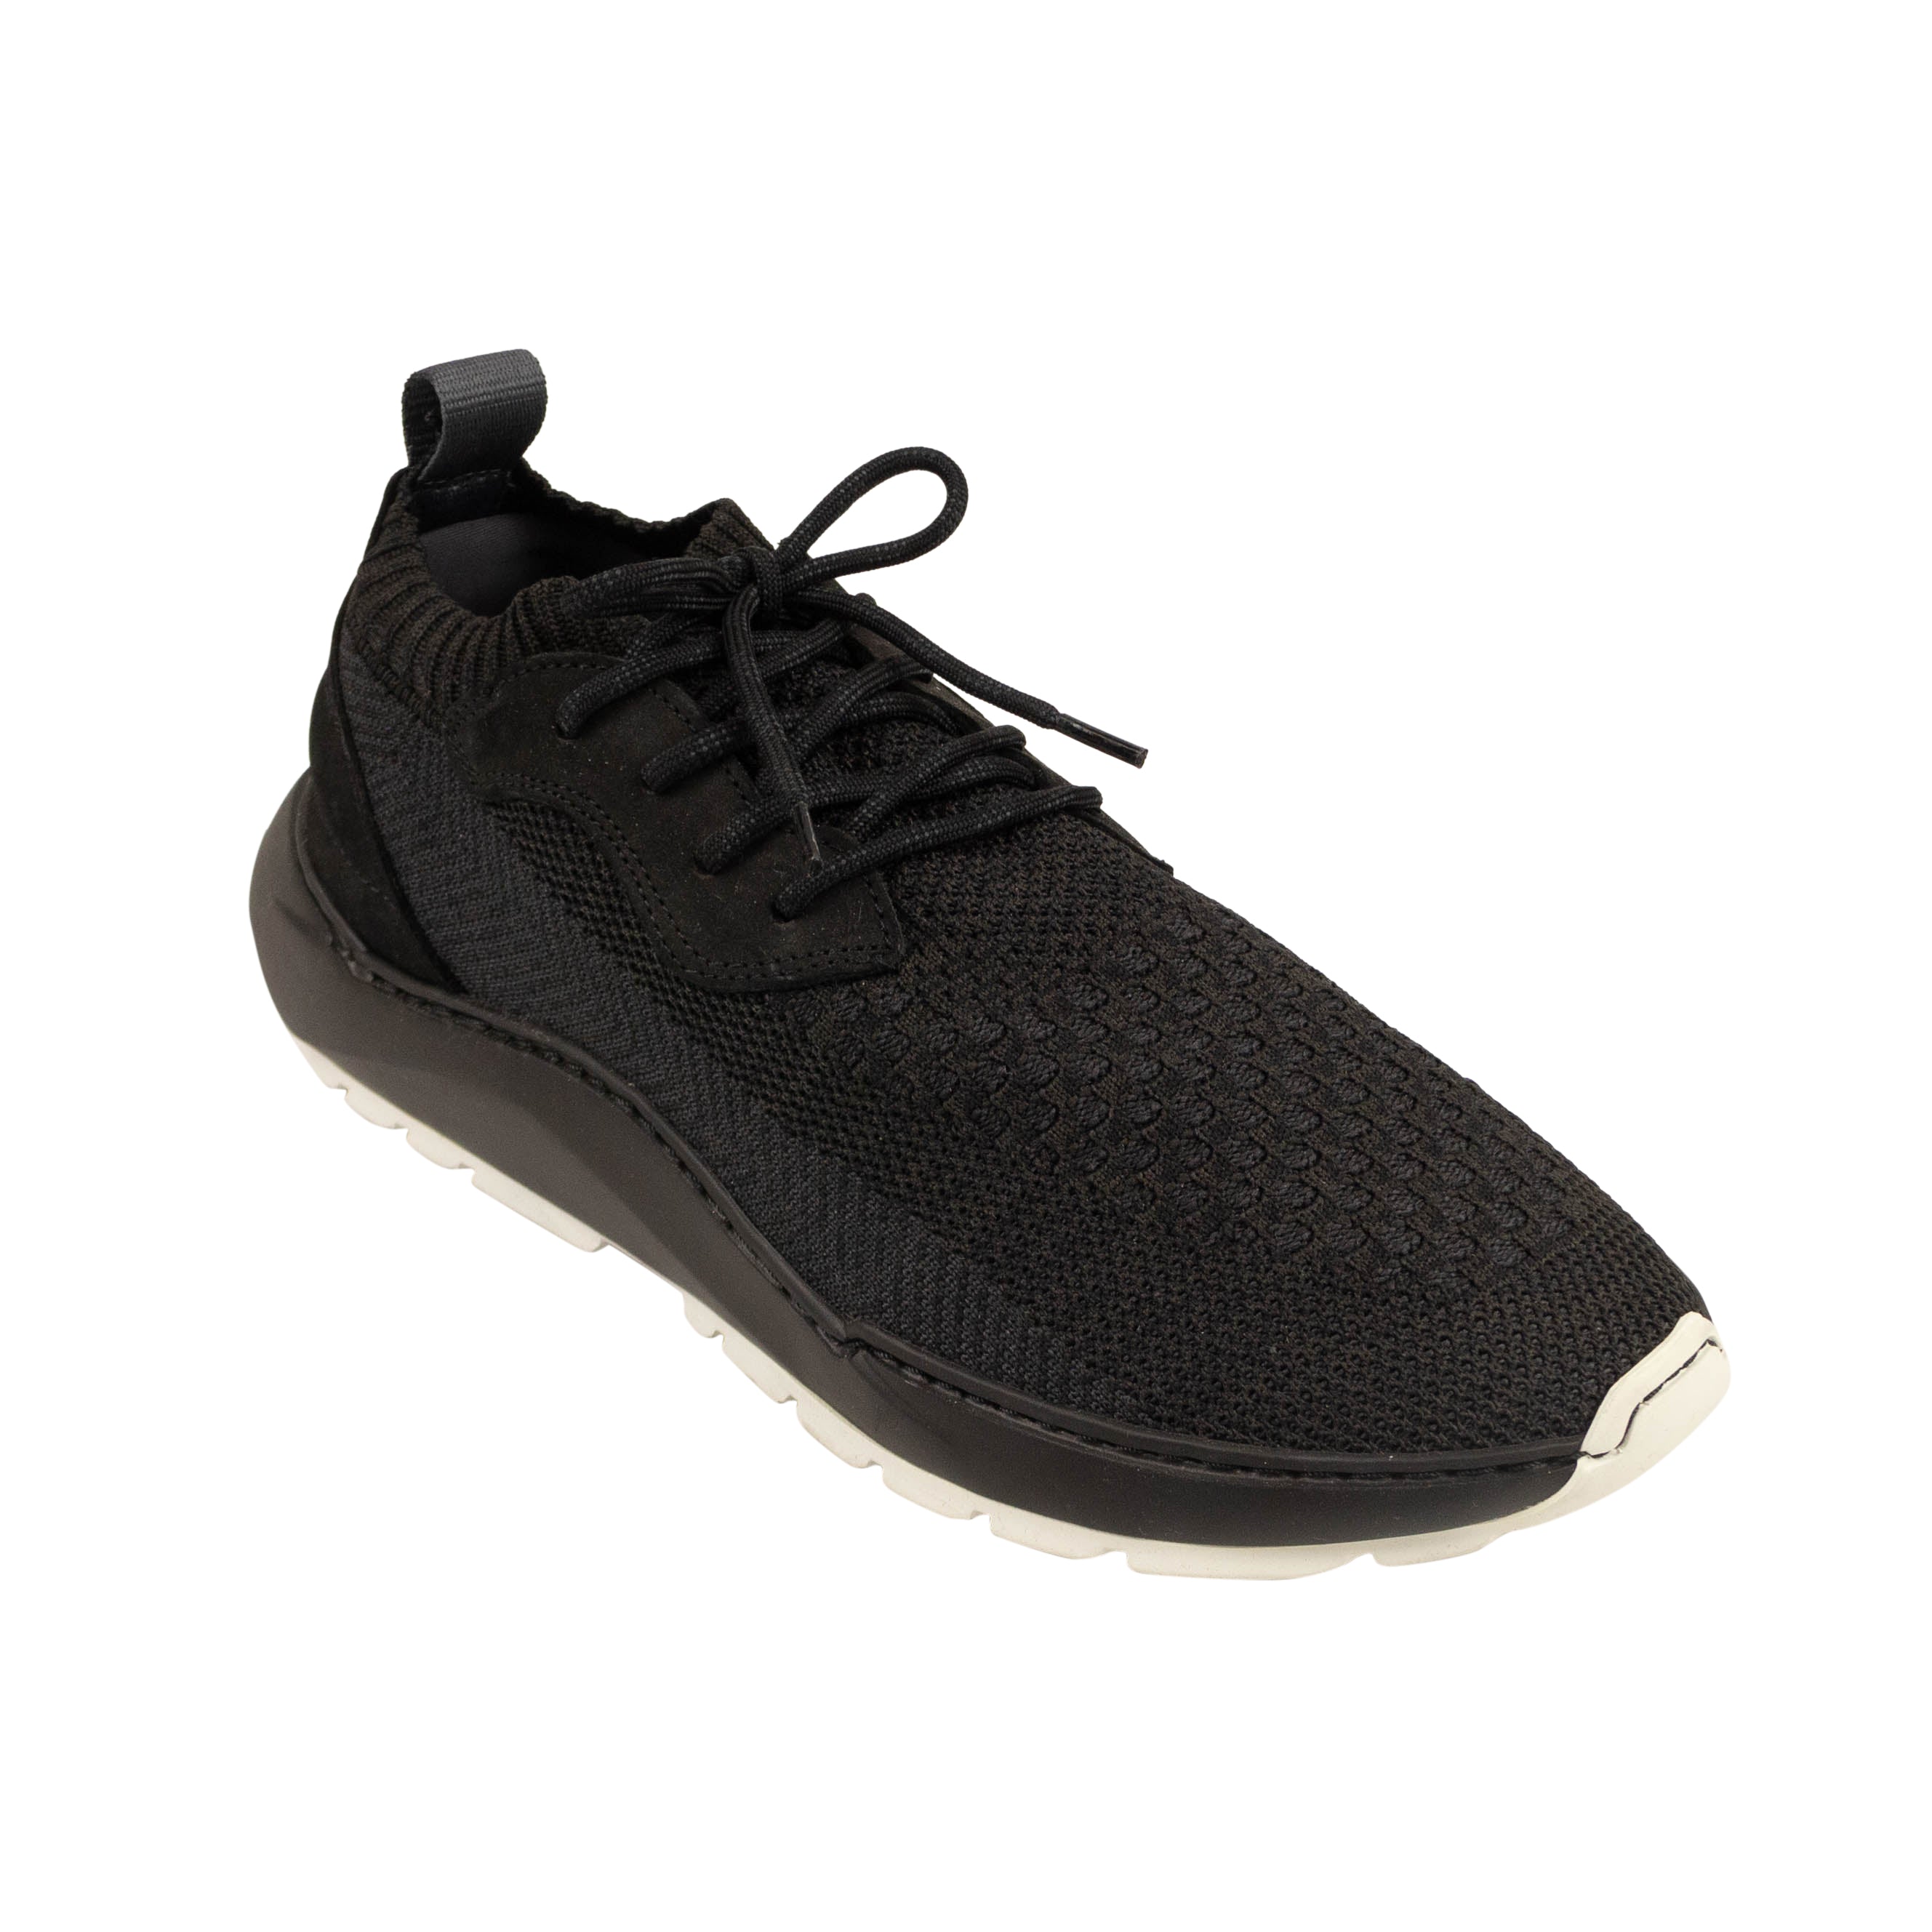 Filling Pieces Knit Speed Arch Runner - Black